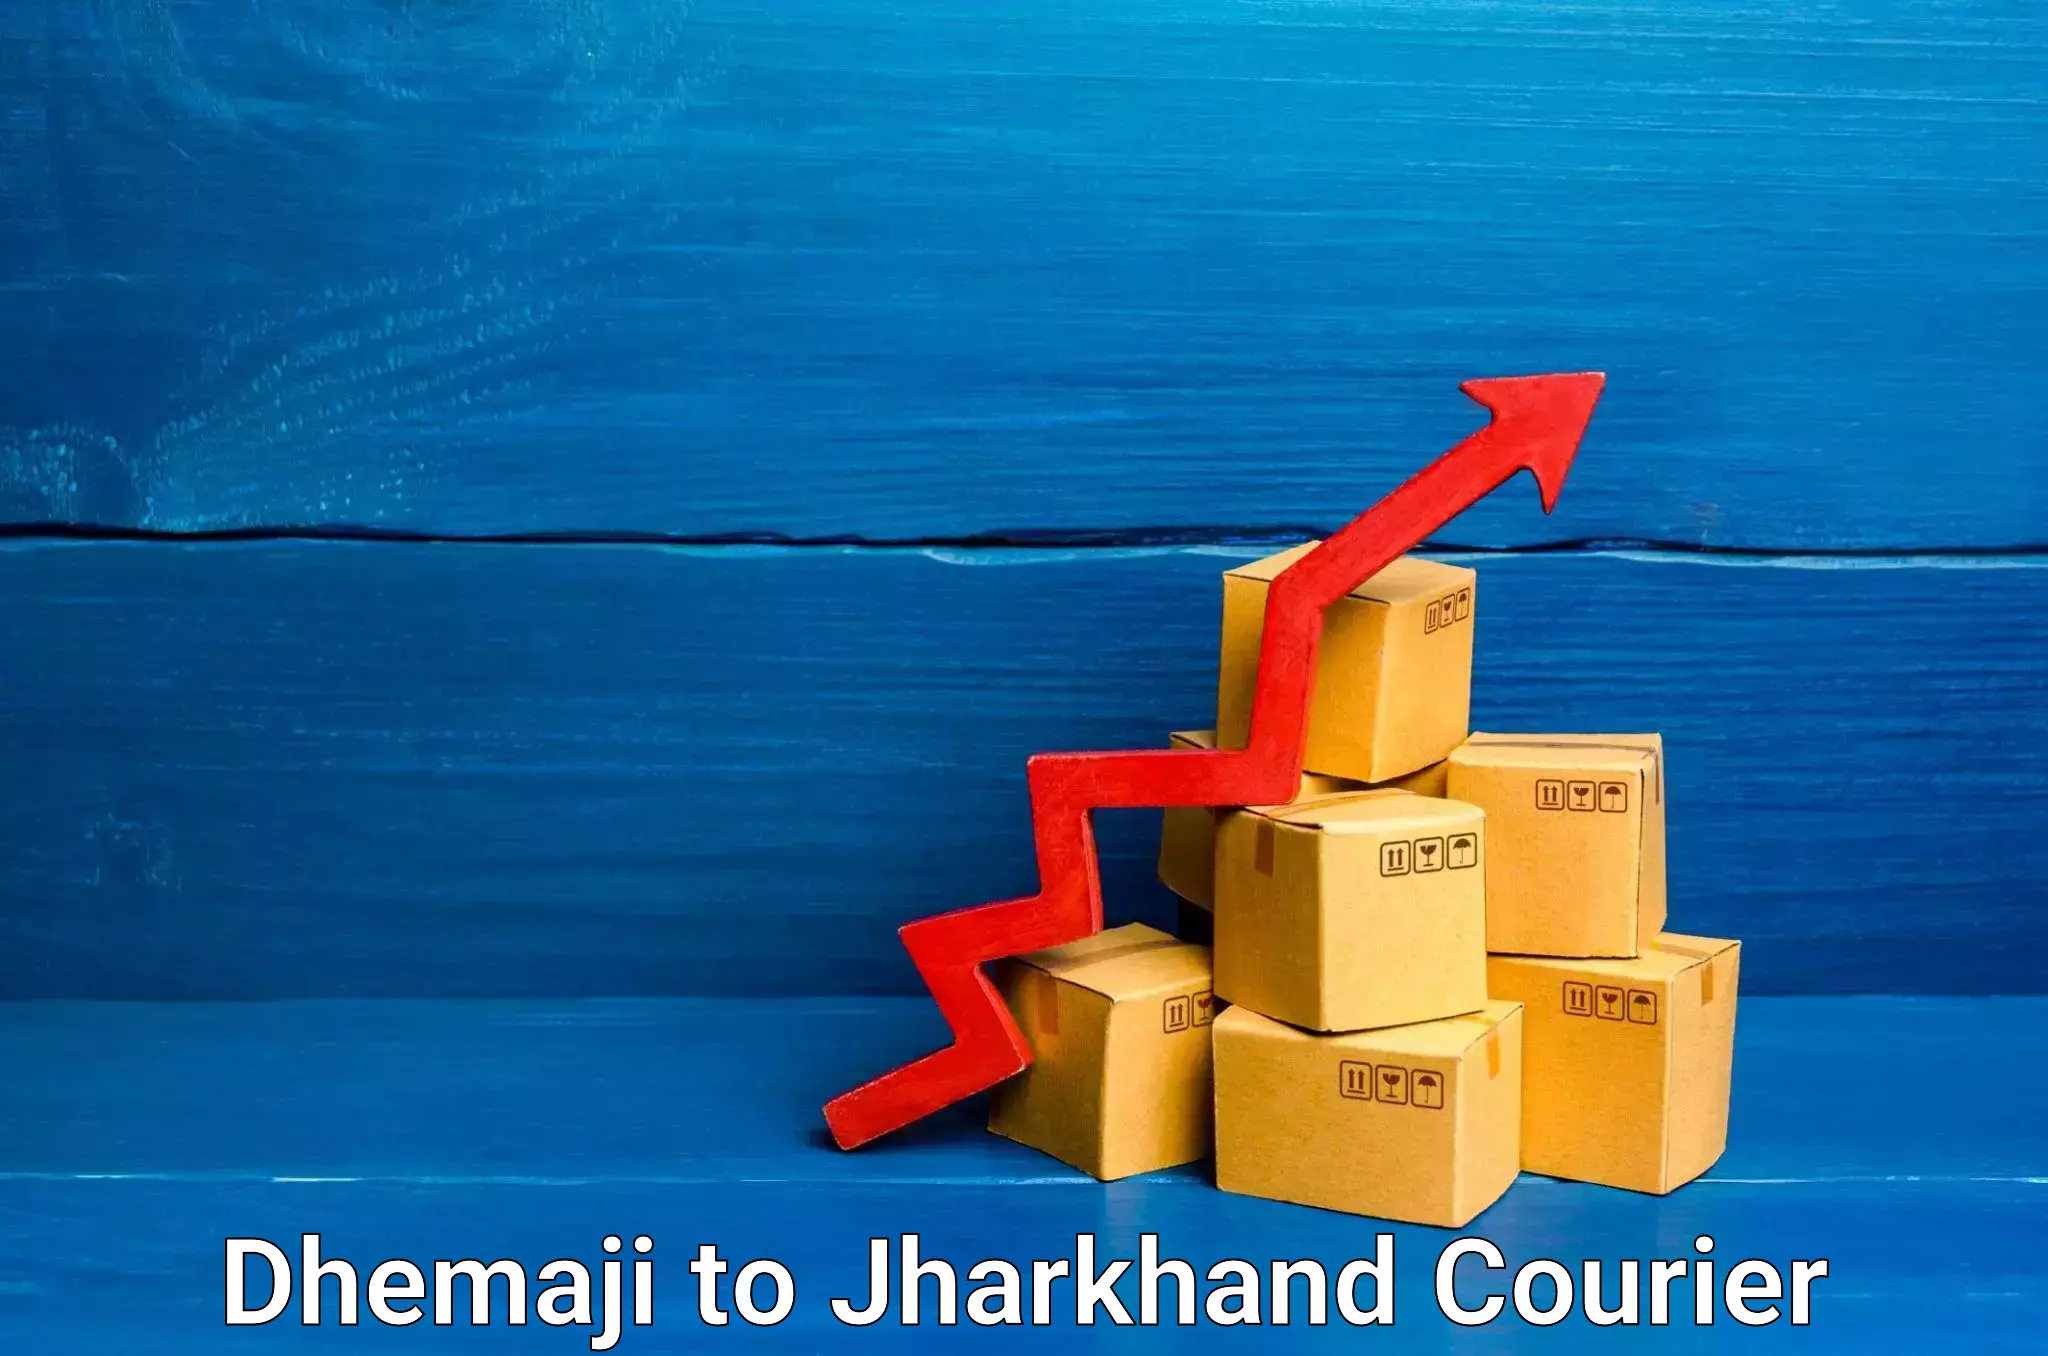 Efficient shipping operations Dhemaji to Jharia